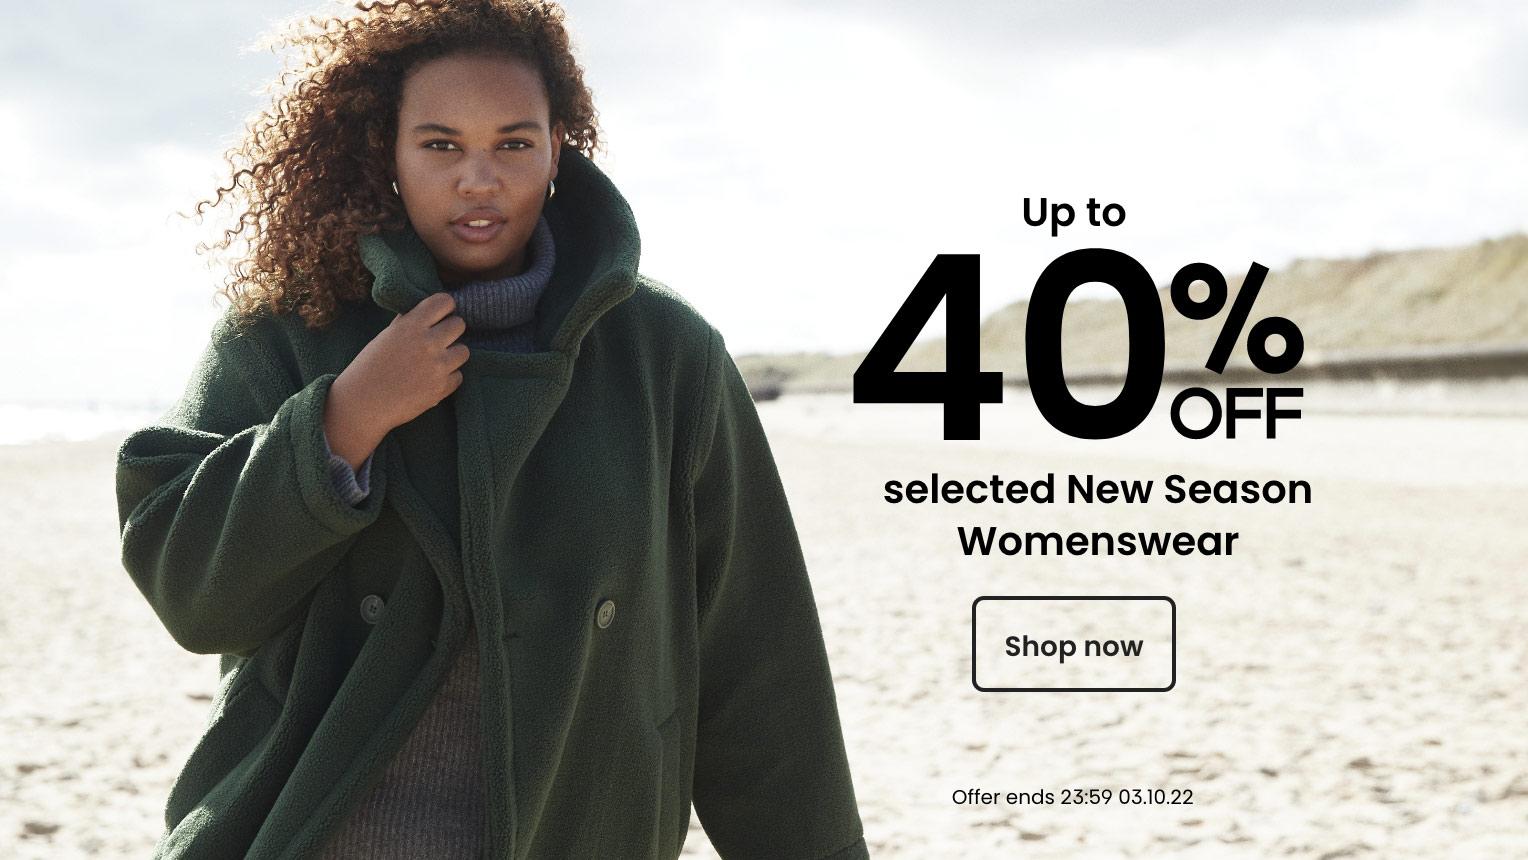 Up to 40% off selected New Season Womenswear. End 23:59. 03.10.22